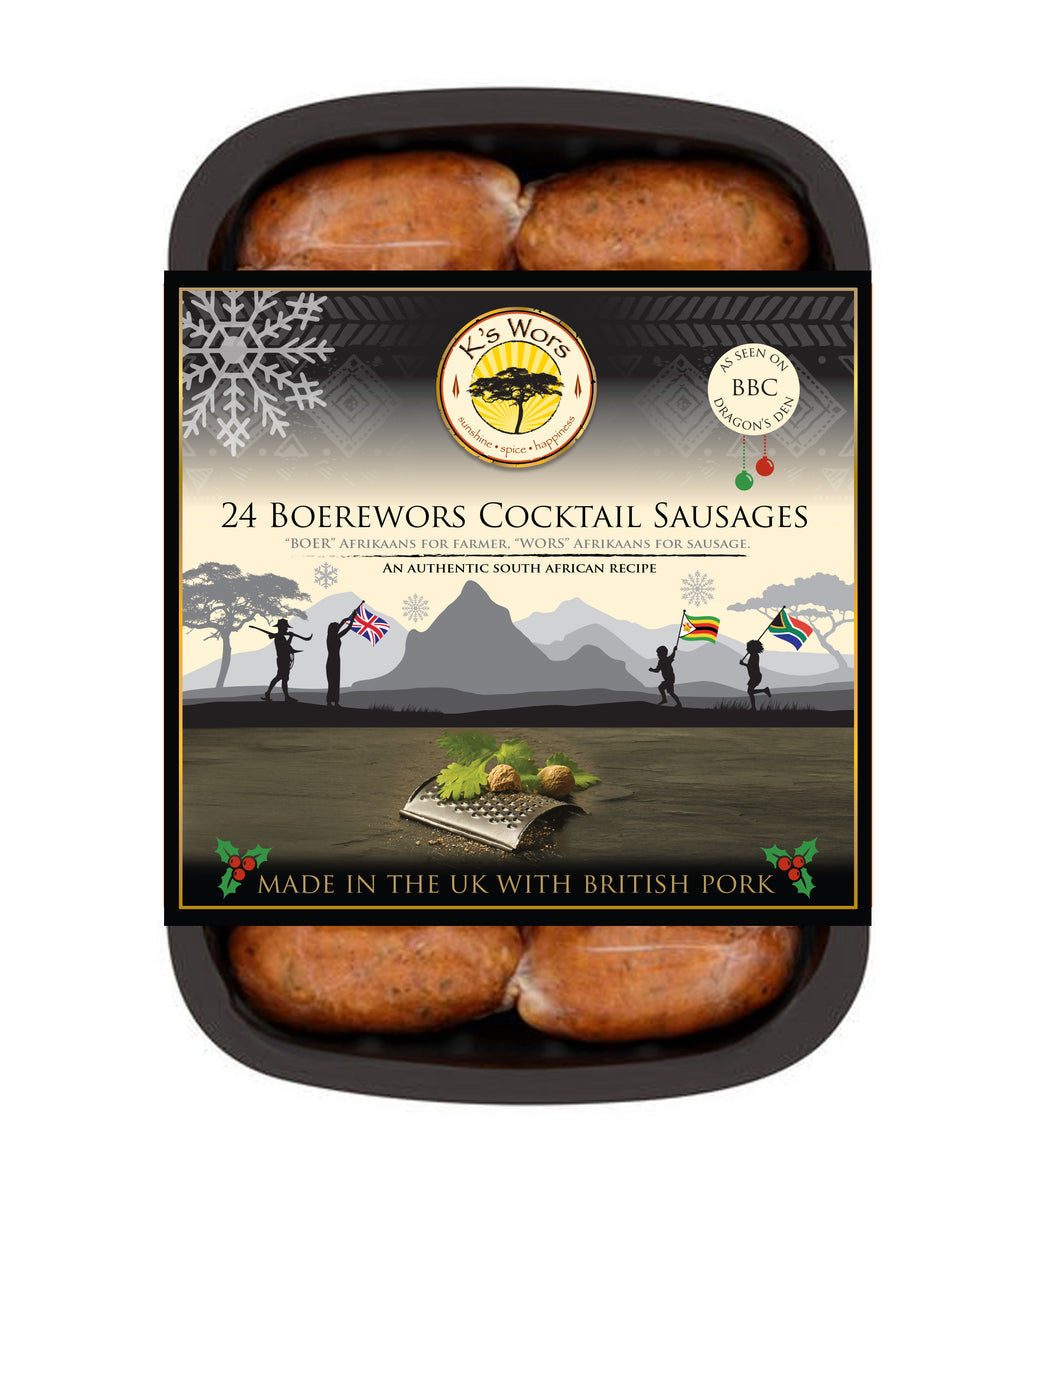 24 Boerewors Cocktail Sausages (Limited Edition)